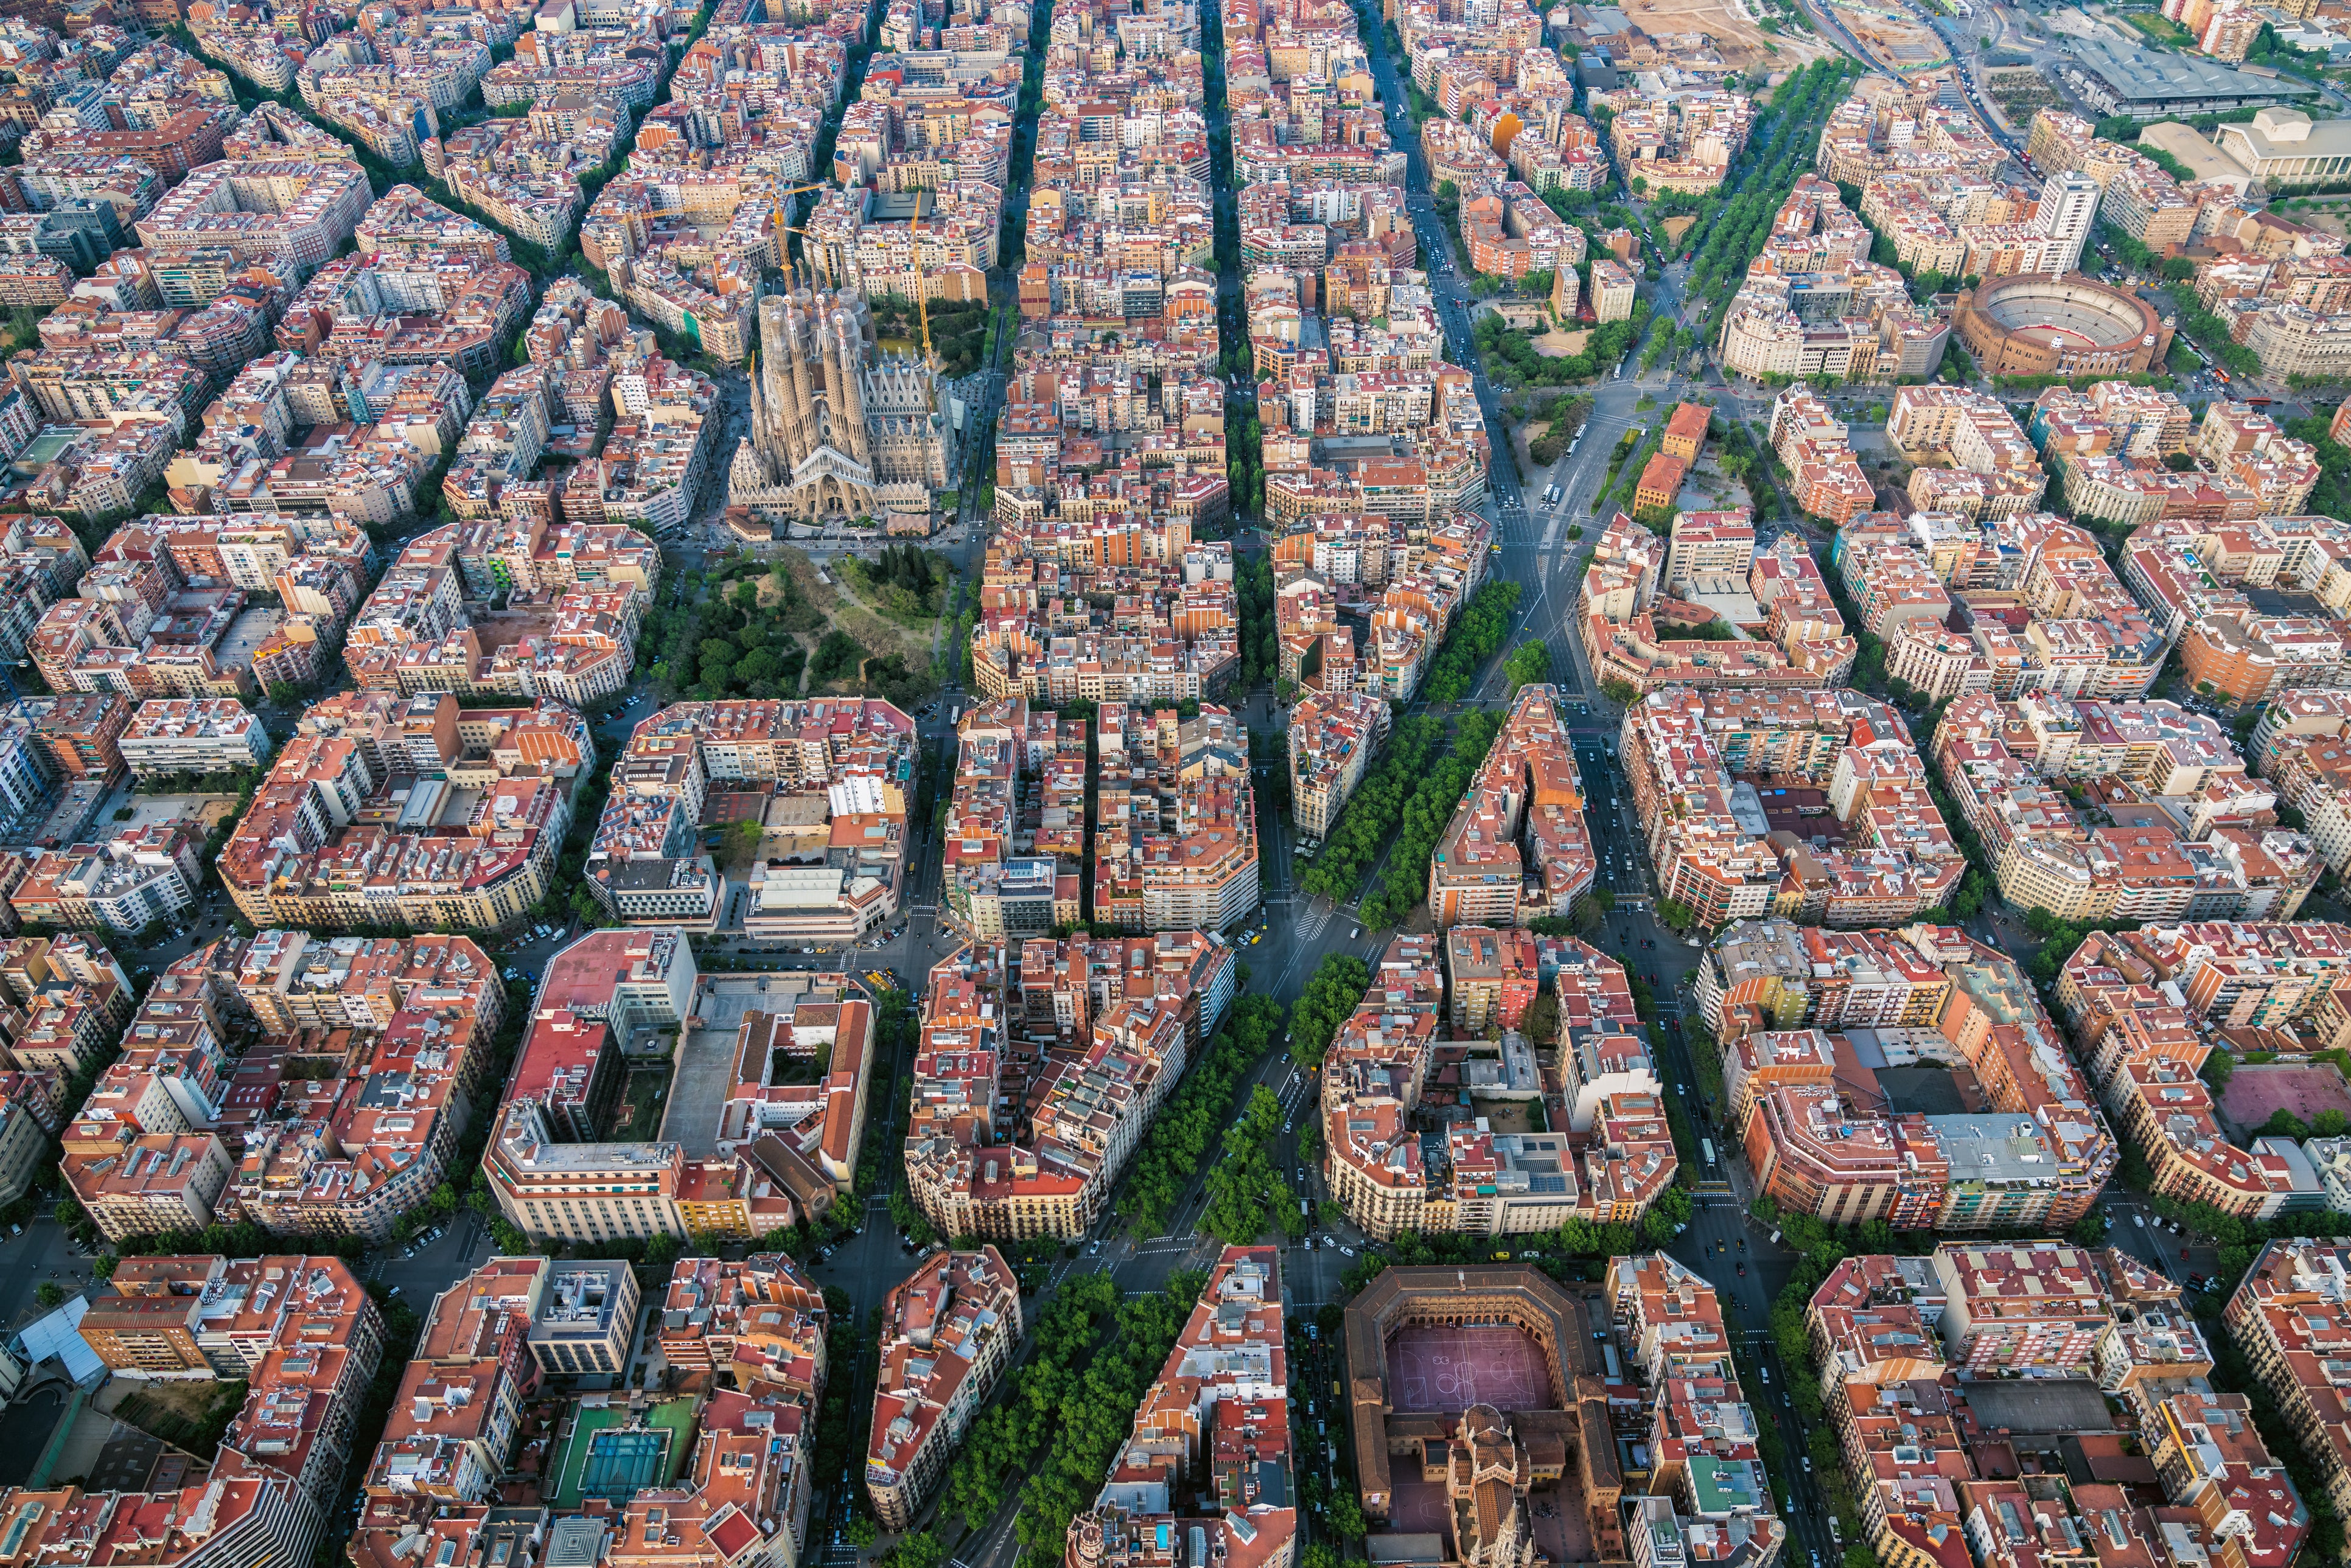 <p>Barcelona frequently endures heatwaves and 2021 was its warmest year in over 200 years </p>